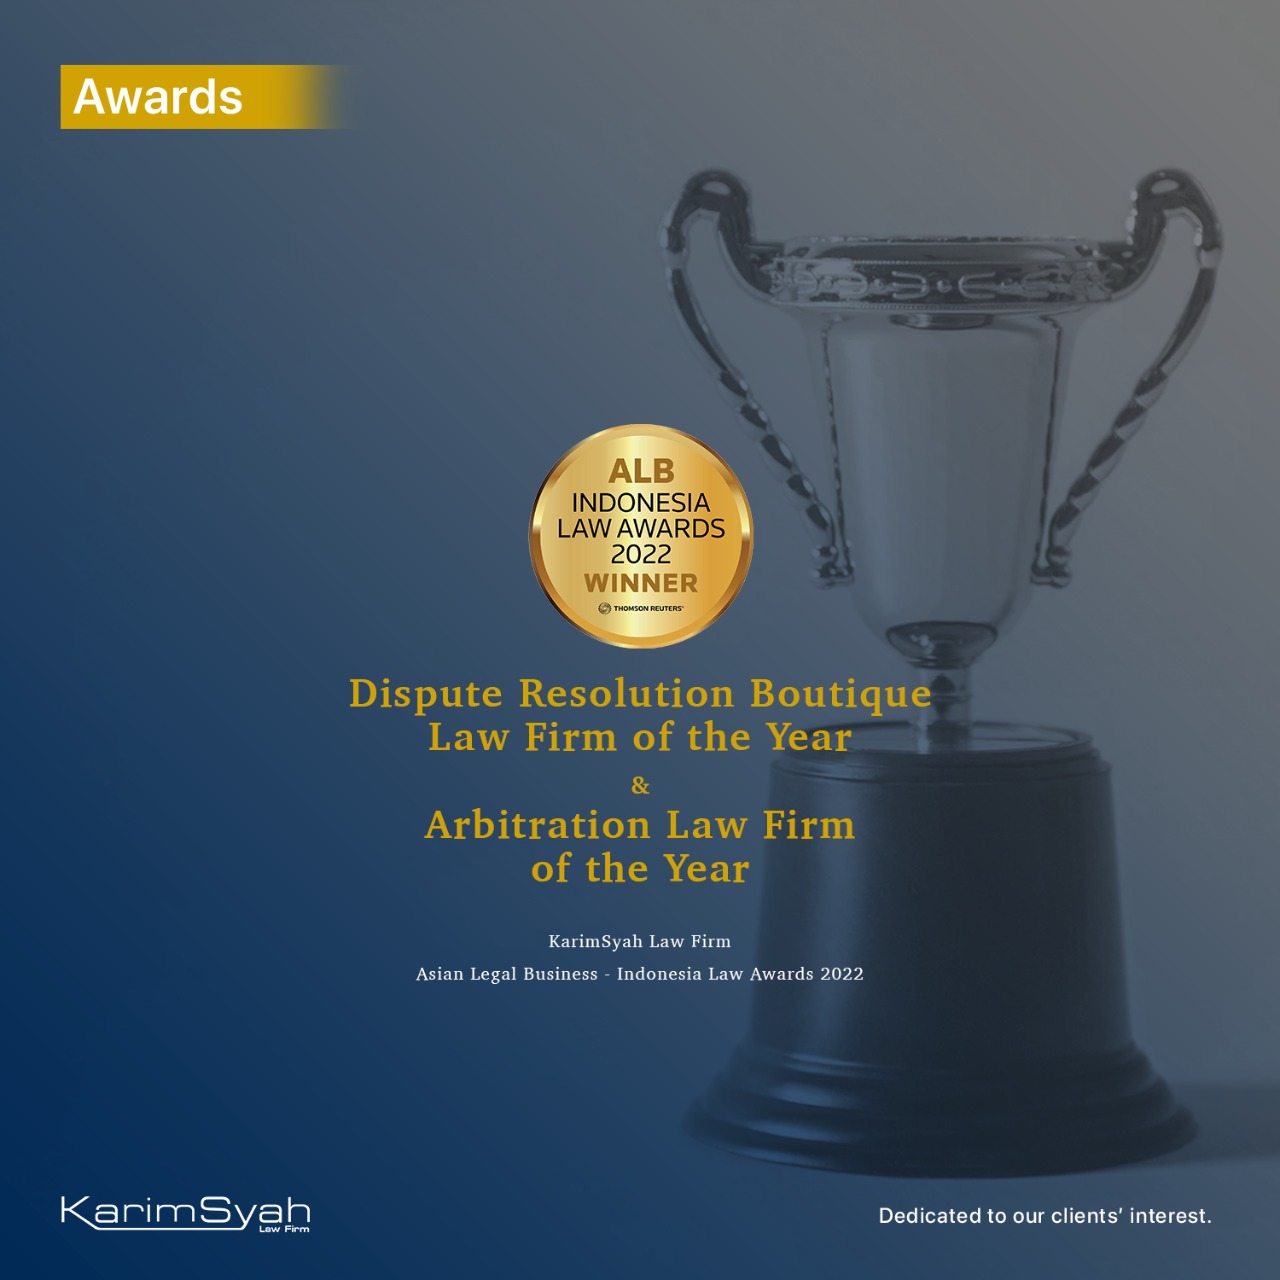 KarimSyah wins Dispute Resolution Boutique Law Firm of the Year and Arbitration Law Firm of the Year